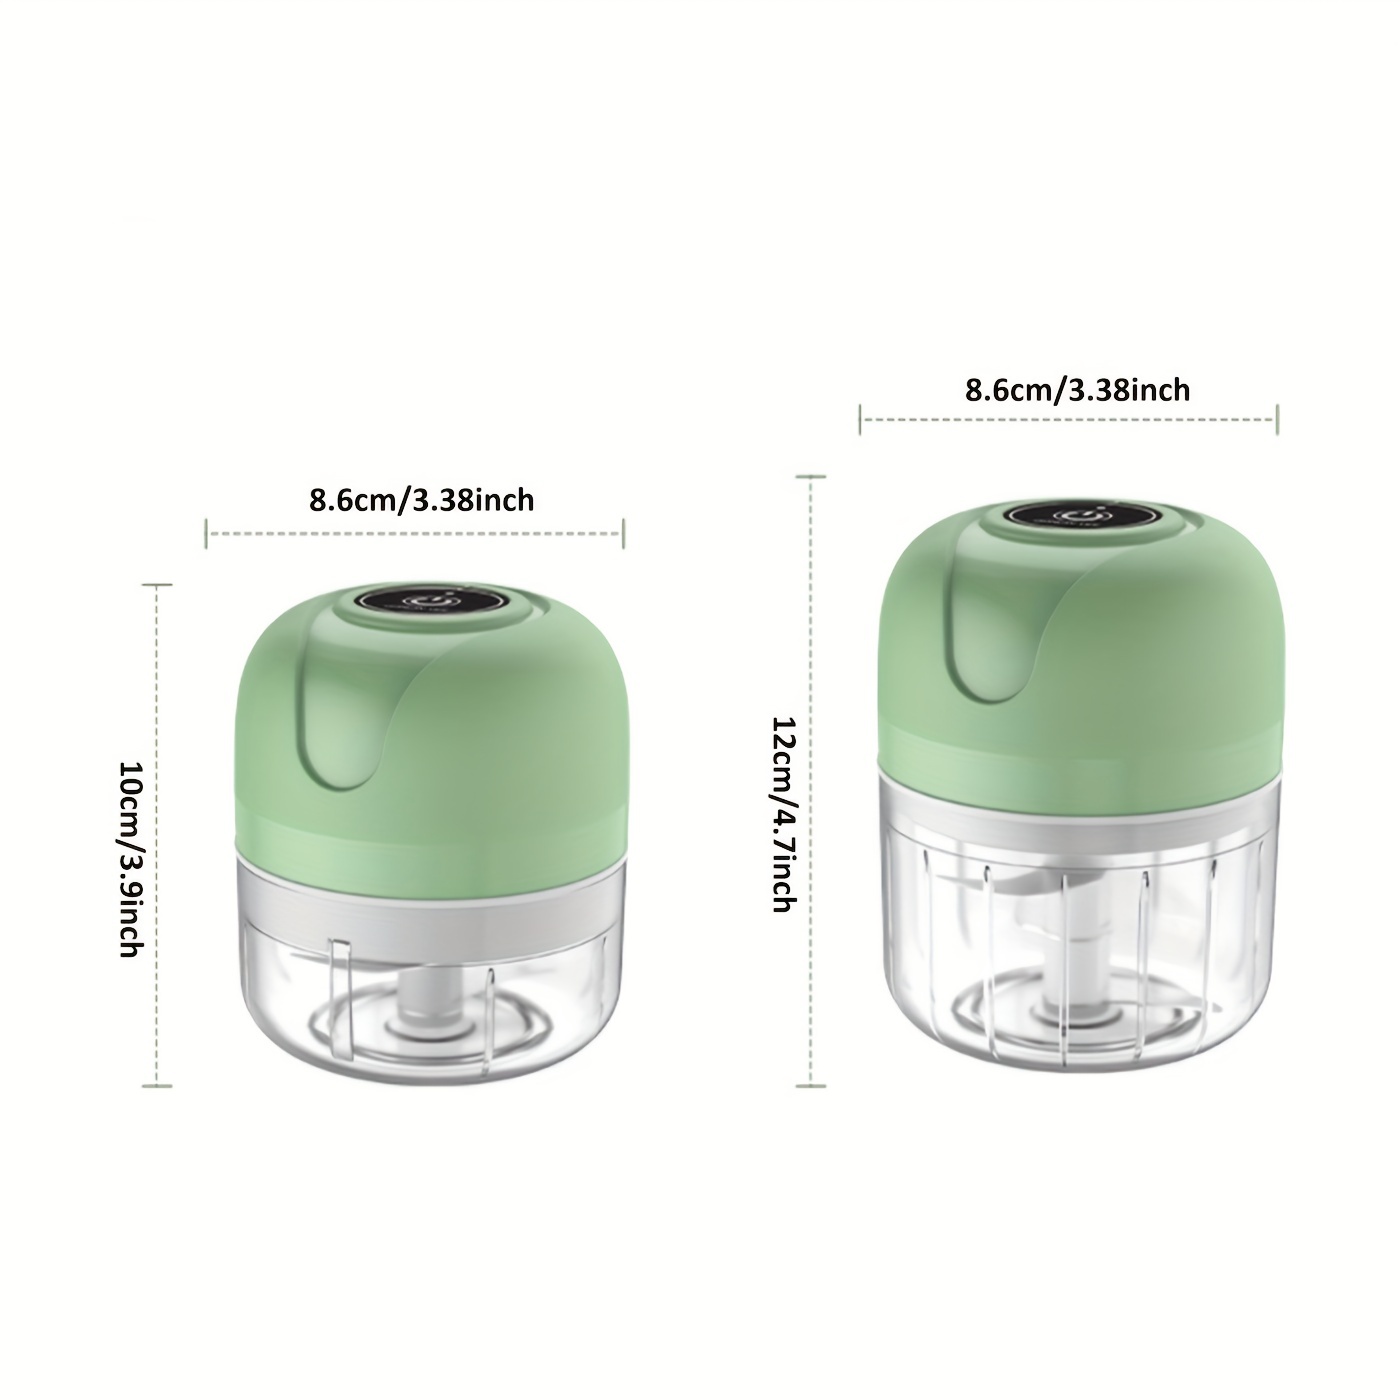 Electric Garlic Chopper With USB charging cable, 100ML cooking machine Onion  Chopper, USB Charging Vegetable Mincer, Electric Mini Chopper, Food  Processor, Kitchen Tools Mini Portable Wireless Food & Nut Chopper for all